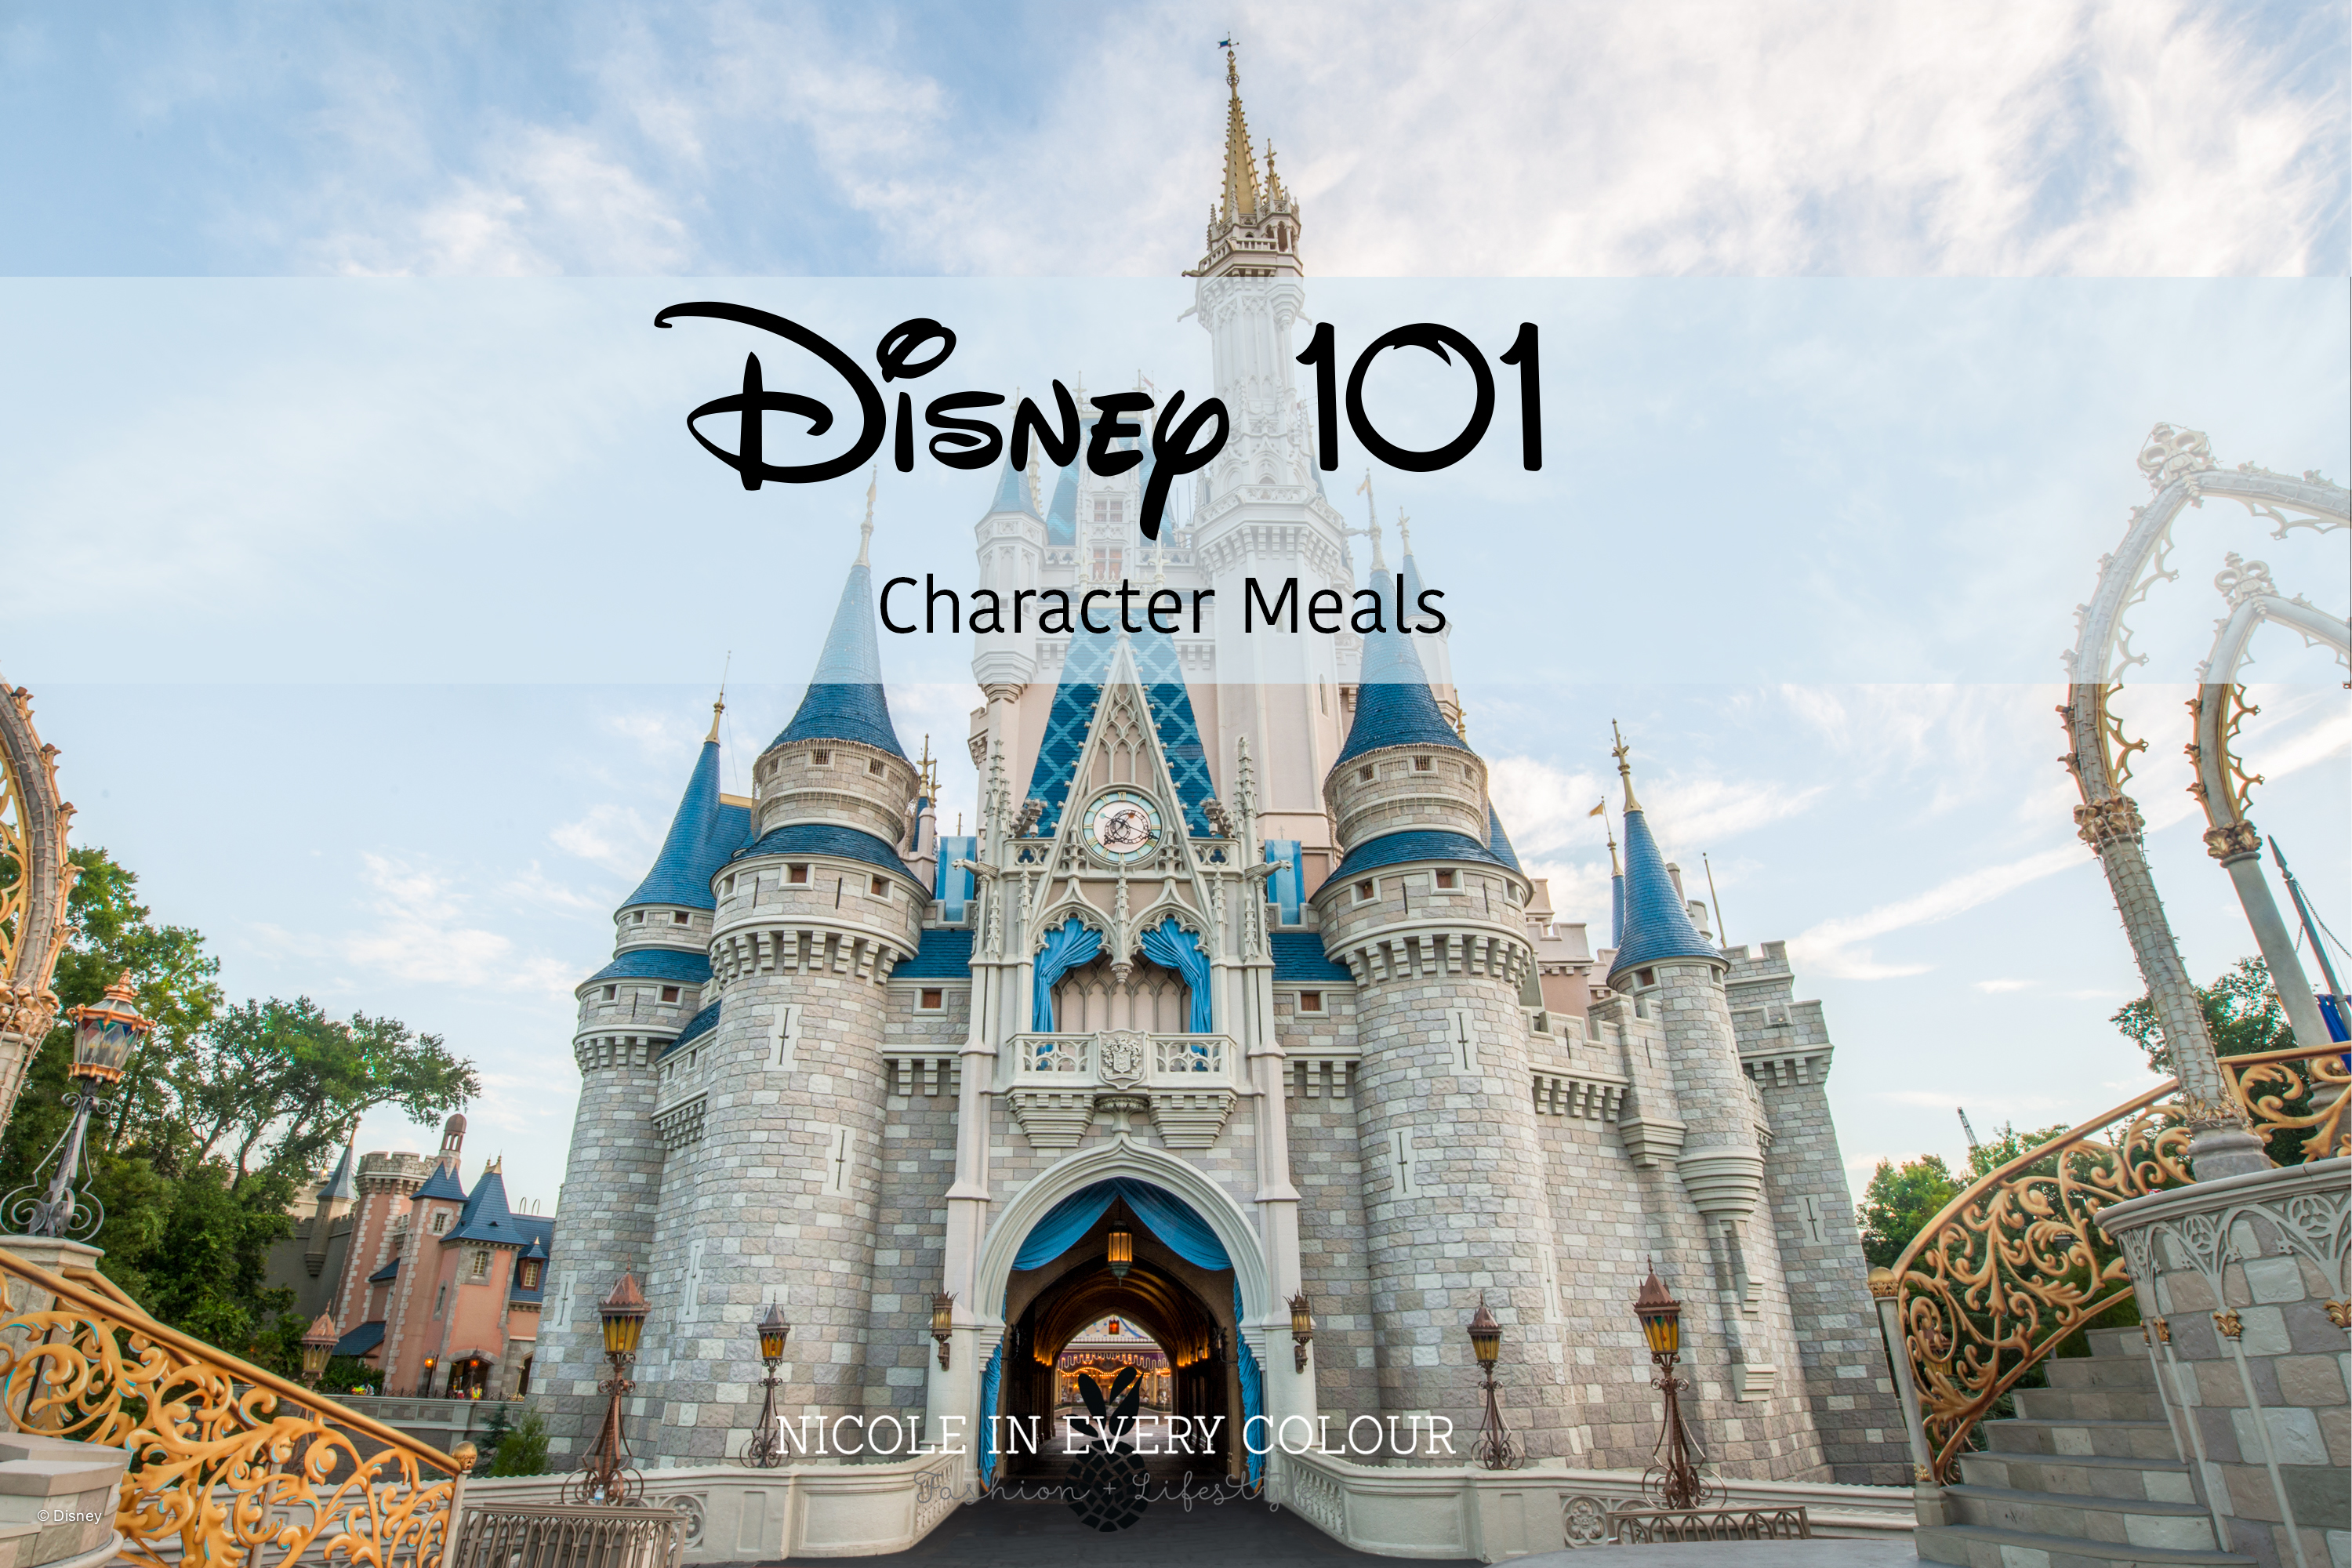 Disney Character Meals are a must stop when visiting the happiest place on earth!